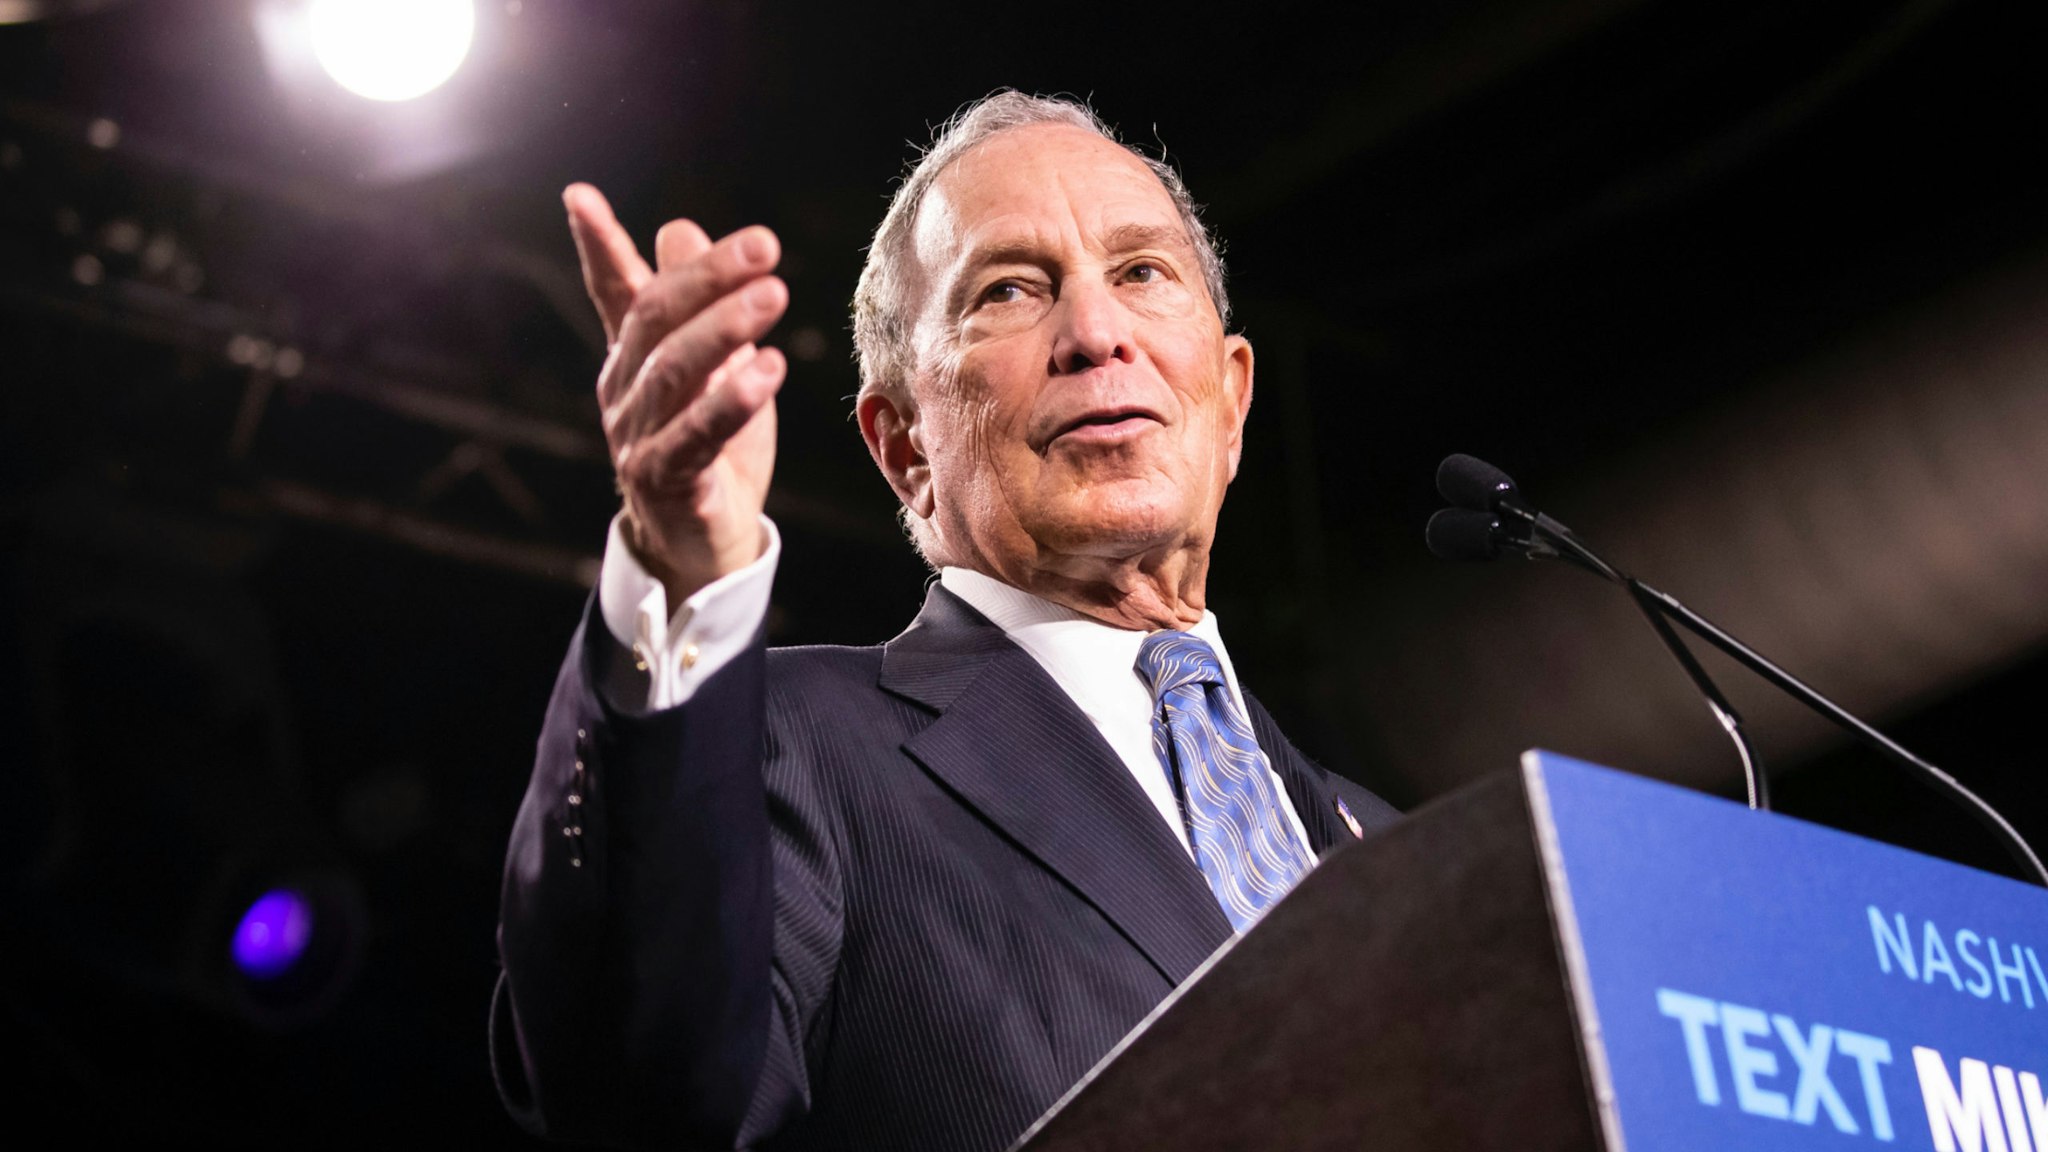 Democratic presidential candidate former New York City Mayor Mike Bloomberg delivers remarks during a campaign rally on February 12, 2020 in Nashville, Tennessee.